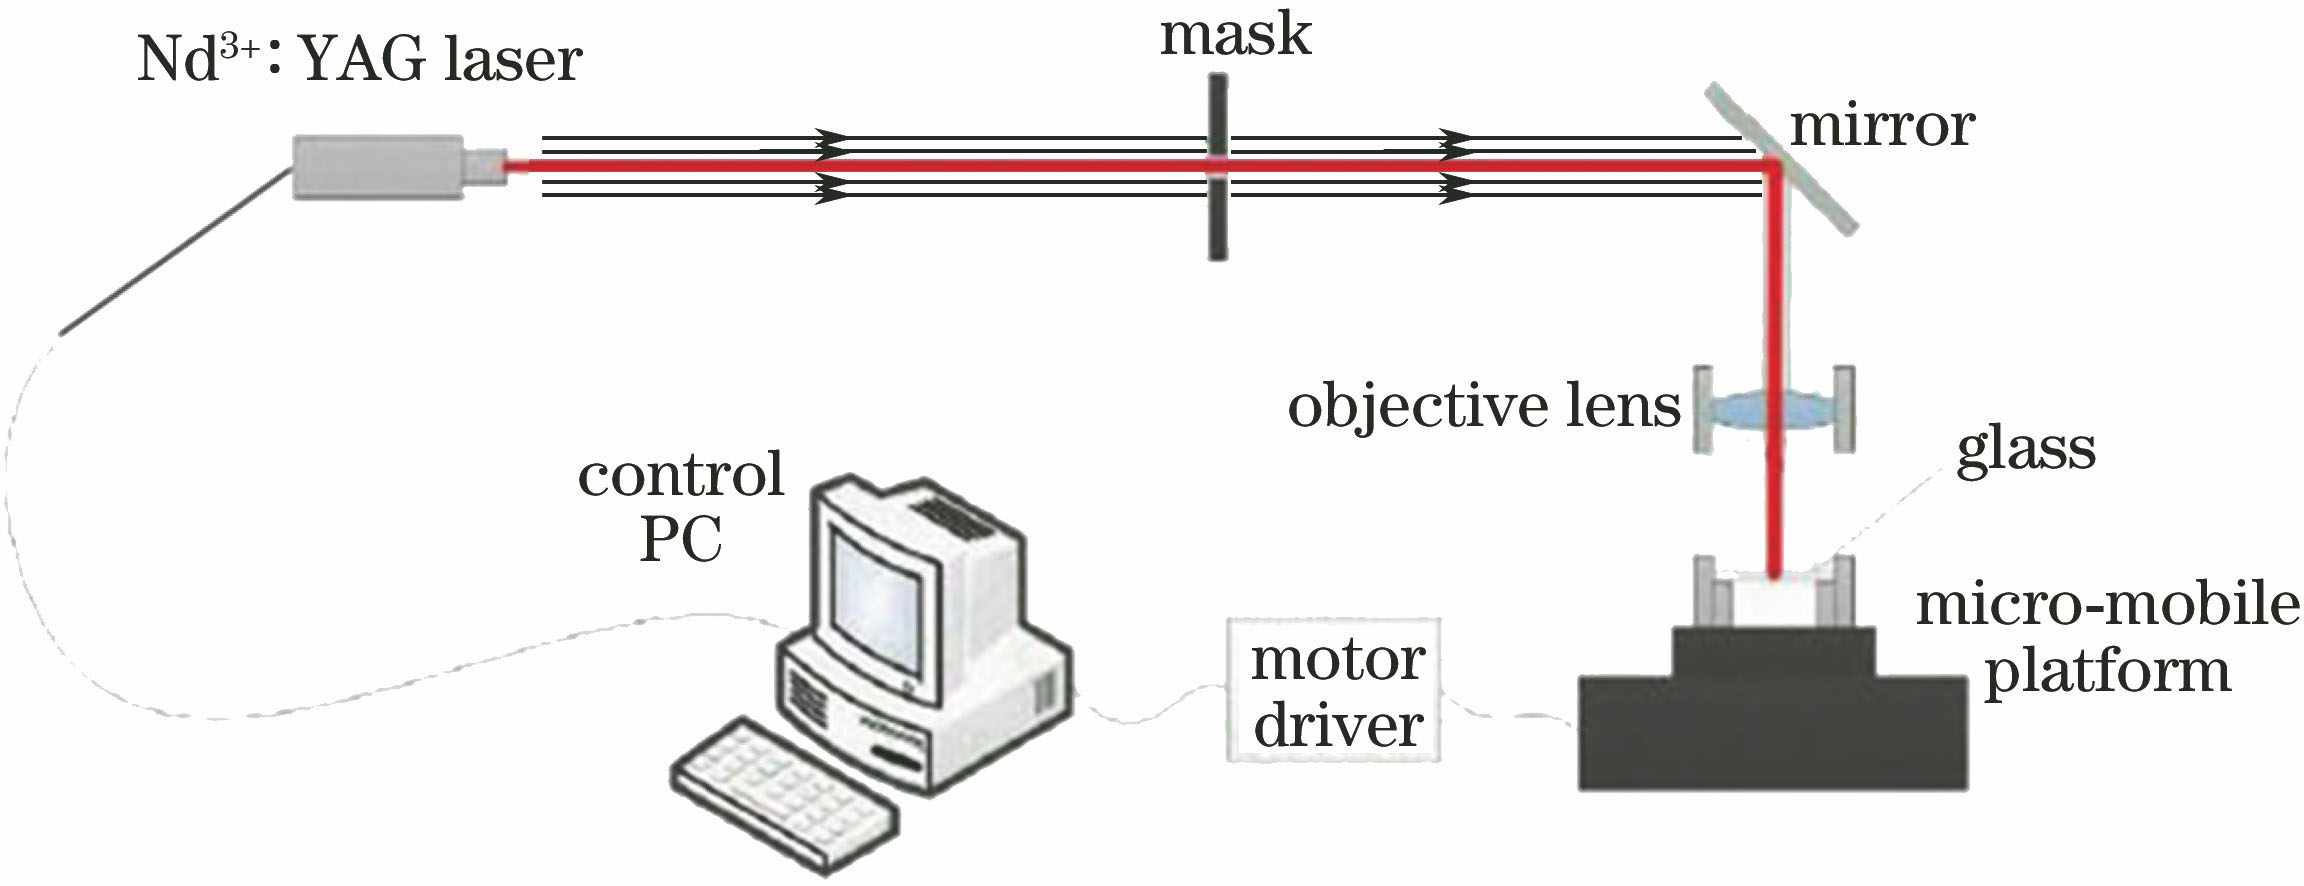 Schematic of experimental setup for Nd3+∶YAG laser etching of glass